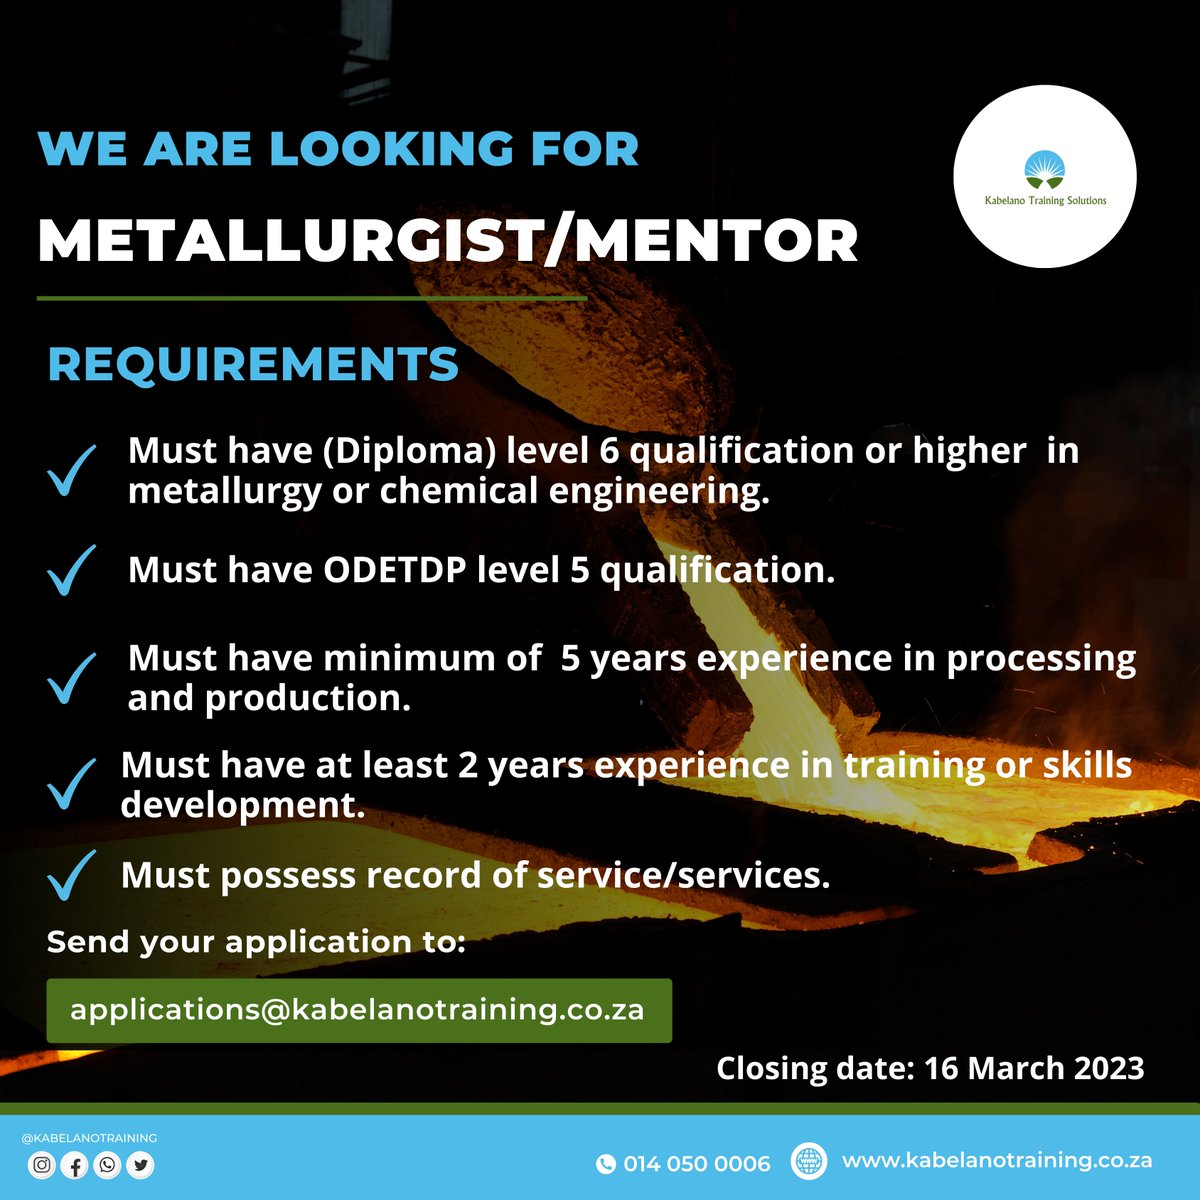 We are looking for a skilled Metallurgist/Mentor to join our team! ✅✅✅
Send your CV and supporting documents to applications@kabelanotraining.co.za
#kabelanotraining#metallurgicalengineering